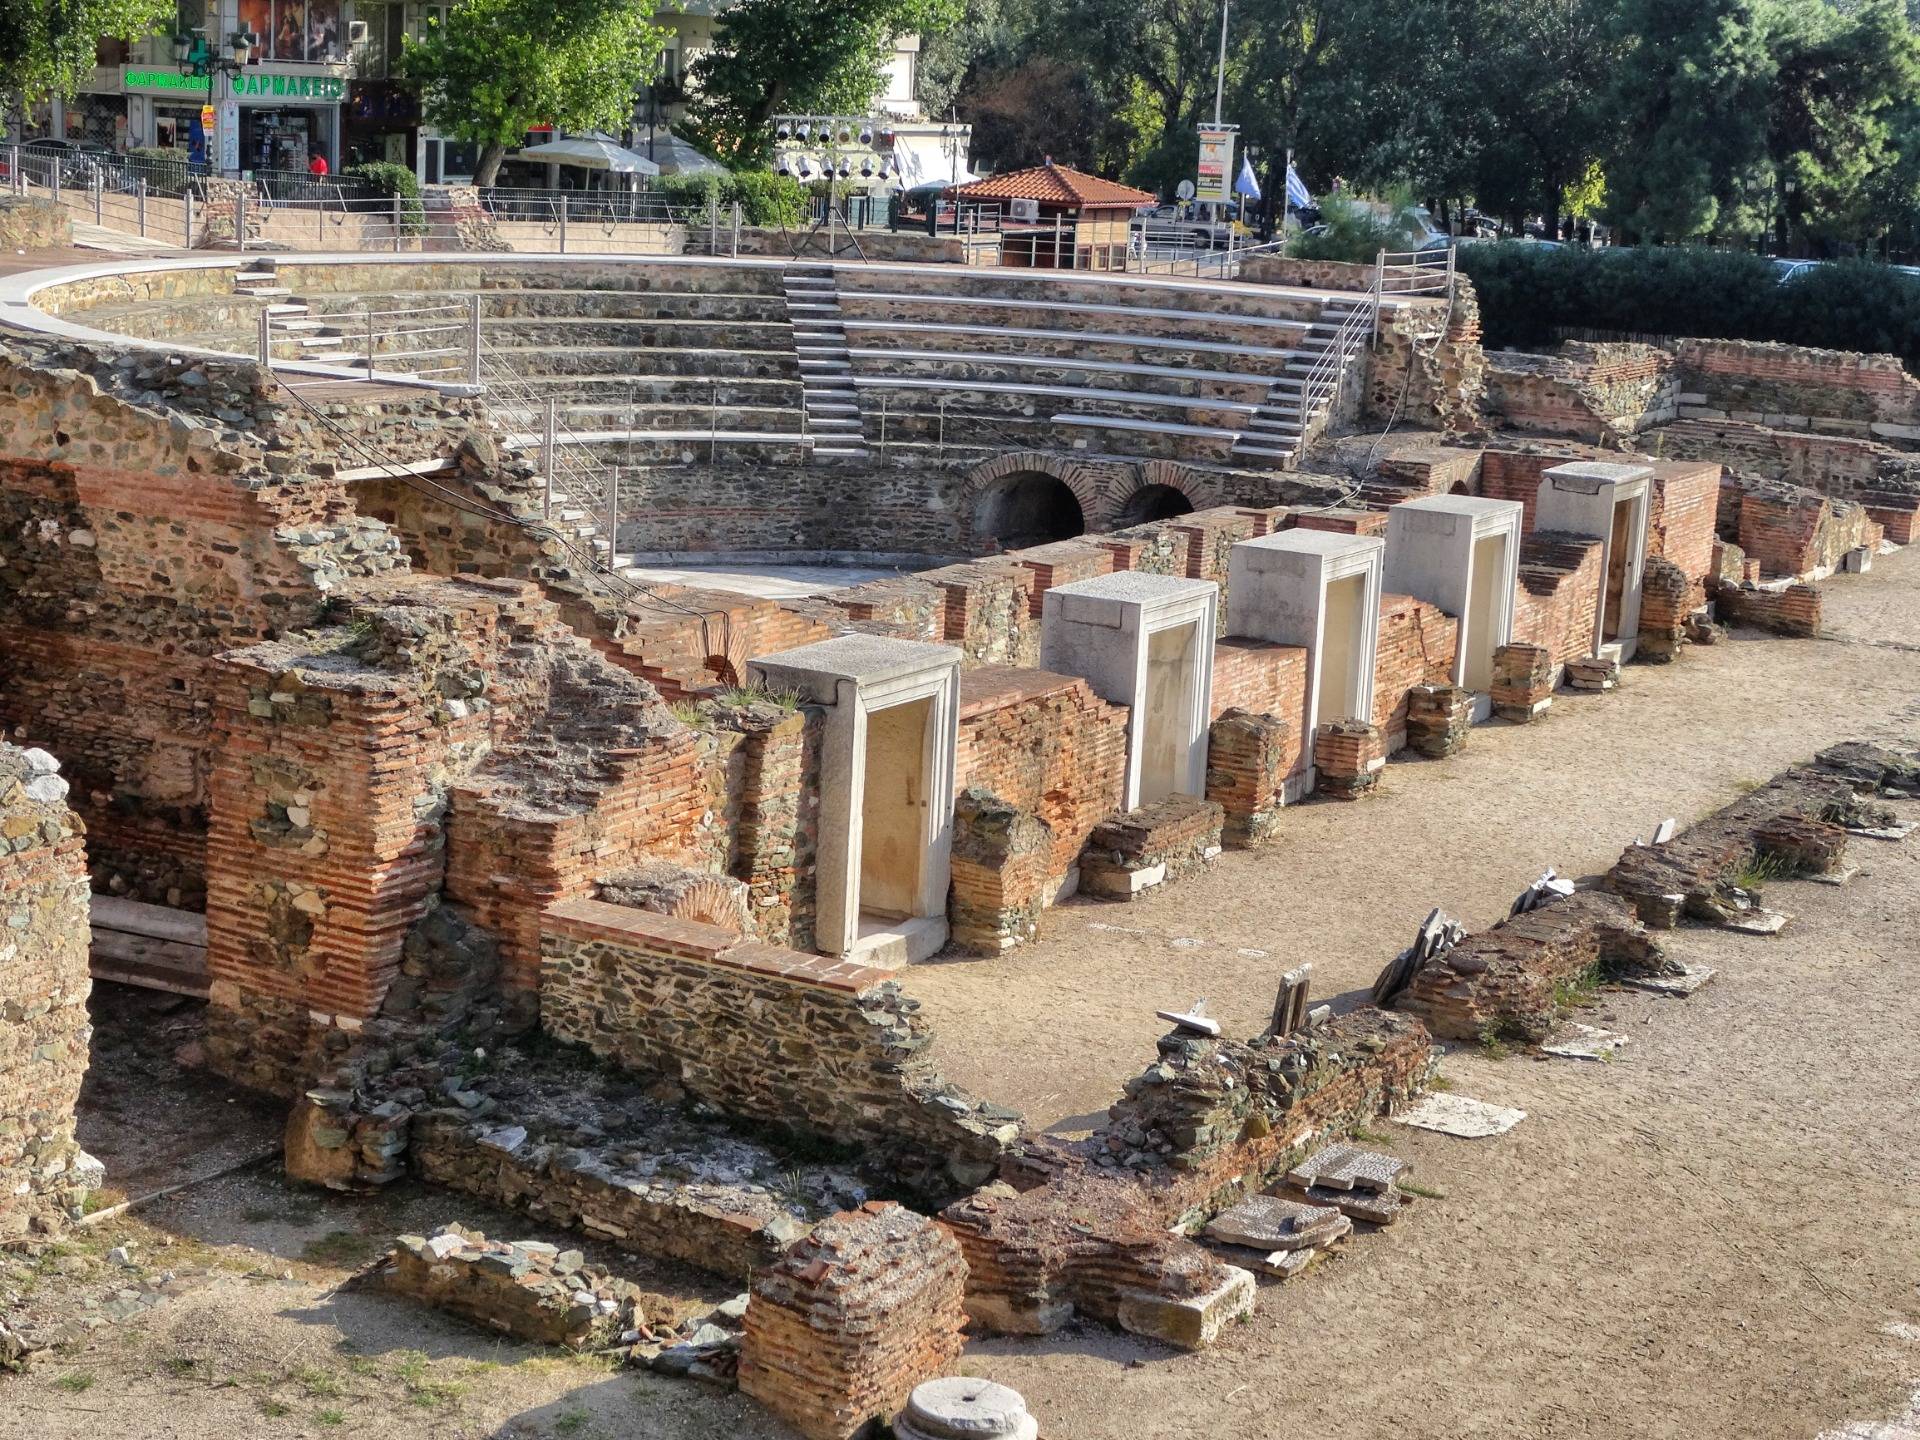 An ancient theatre